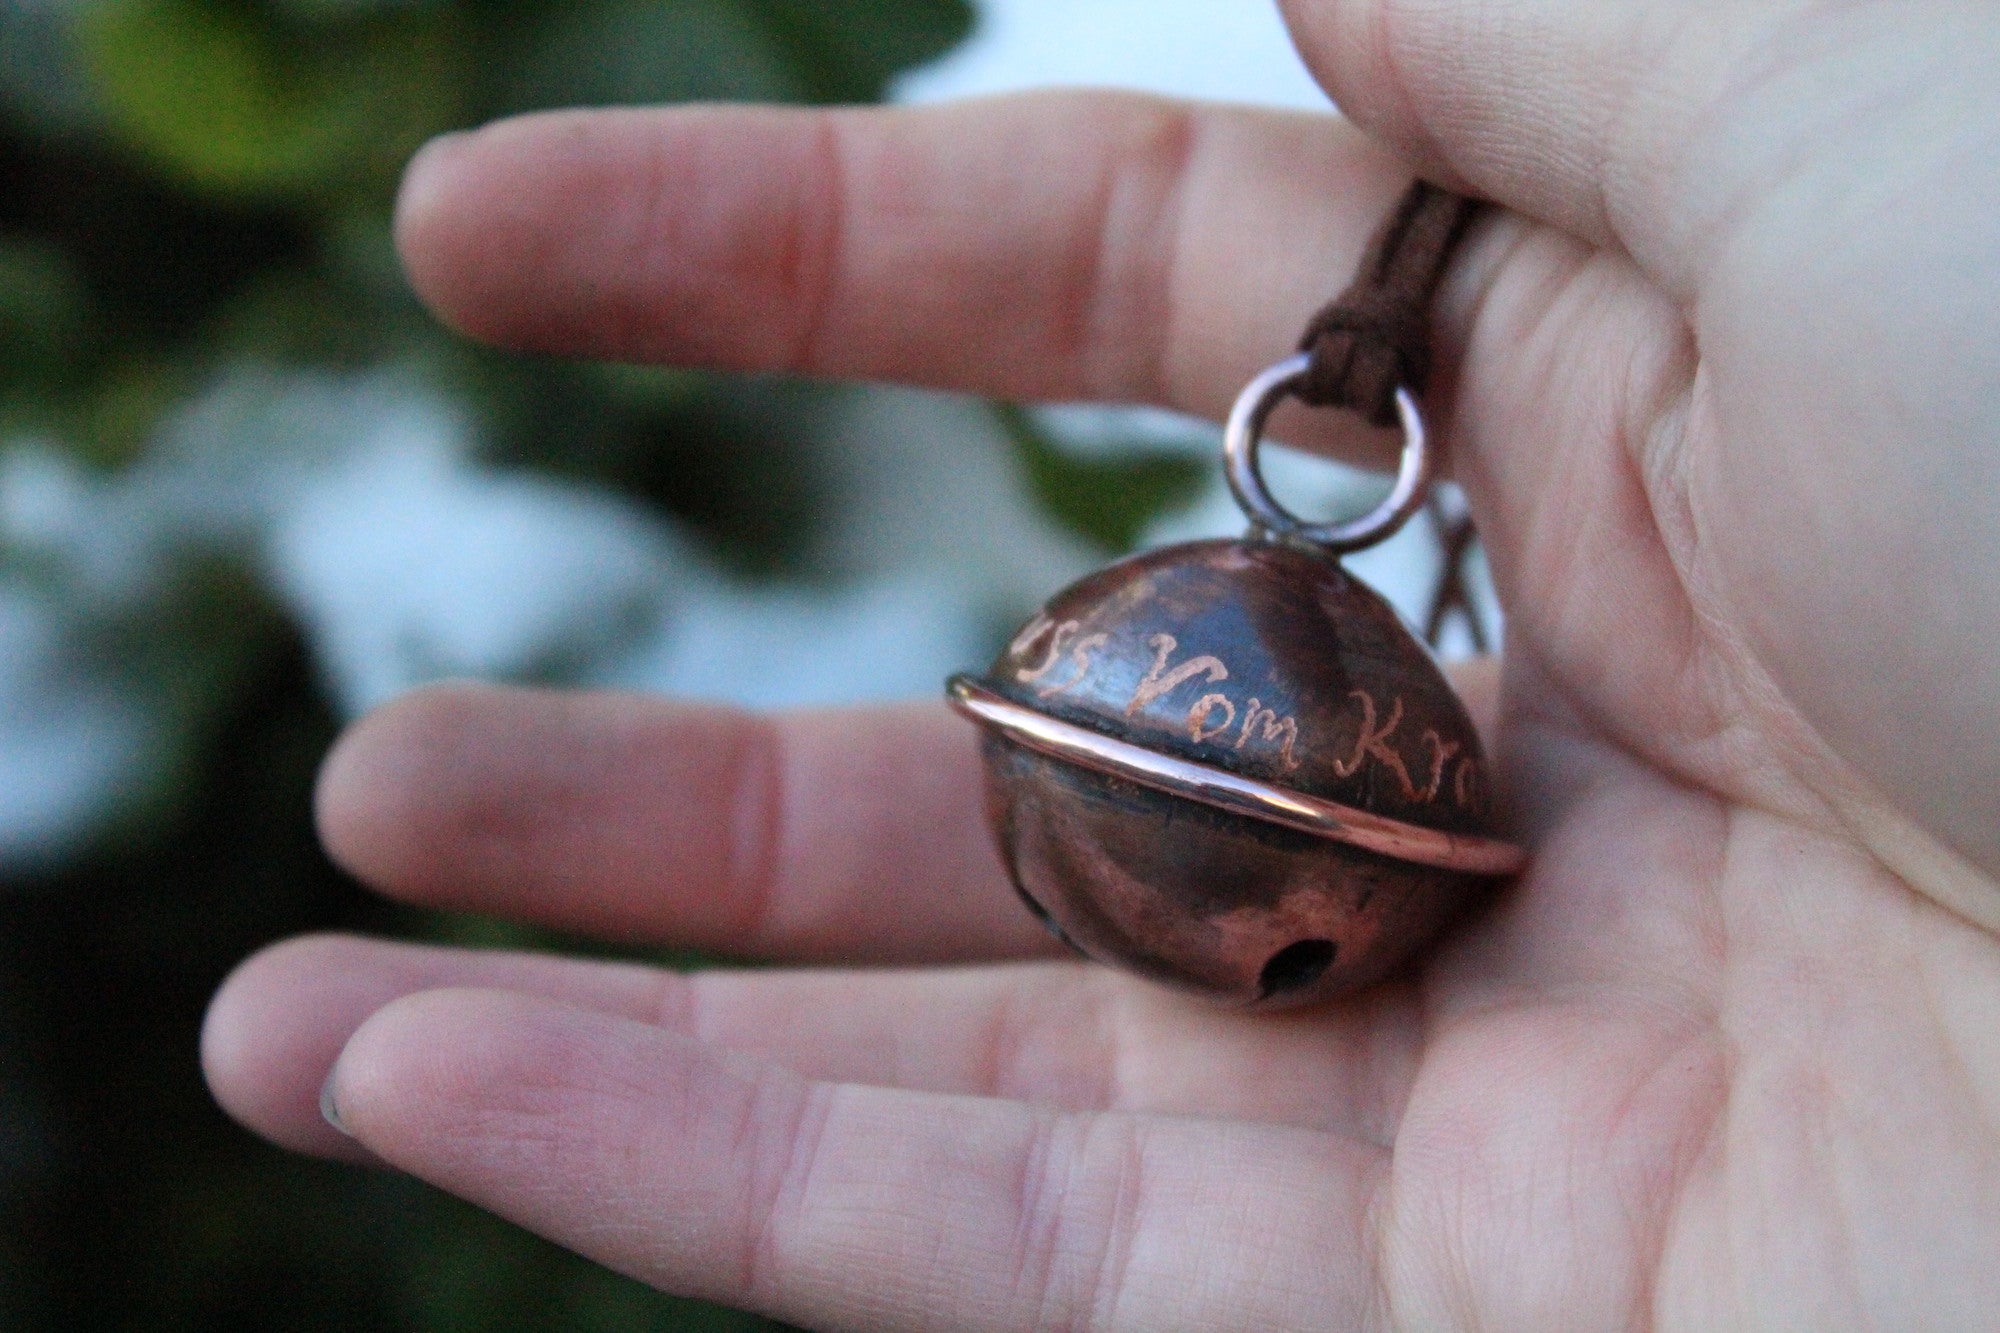 KRAMPUS BELL - Handmade Copper Jingle Bell Ornament (Made to Order)